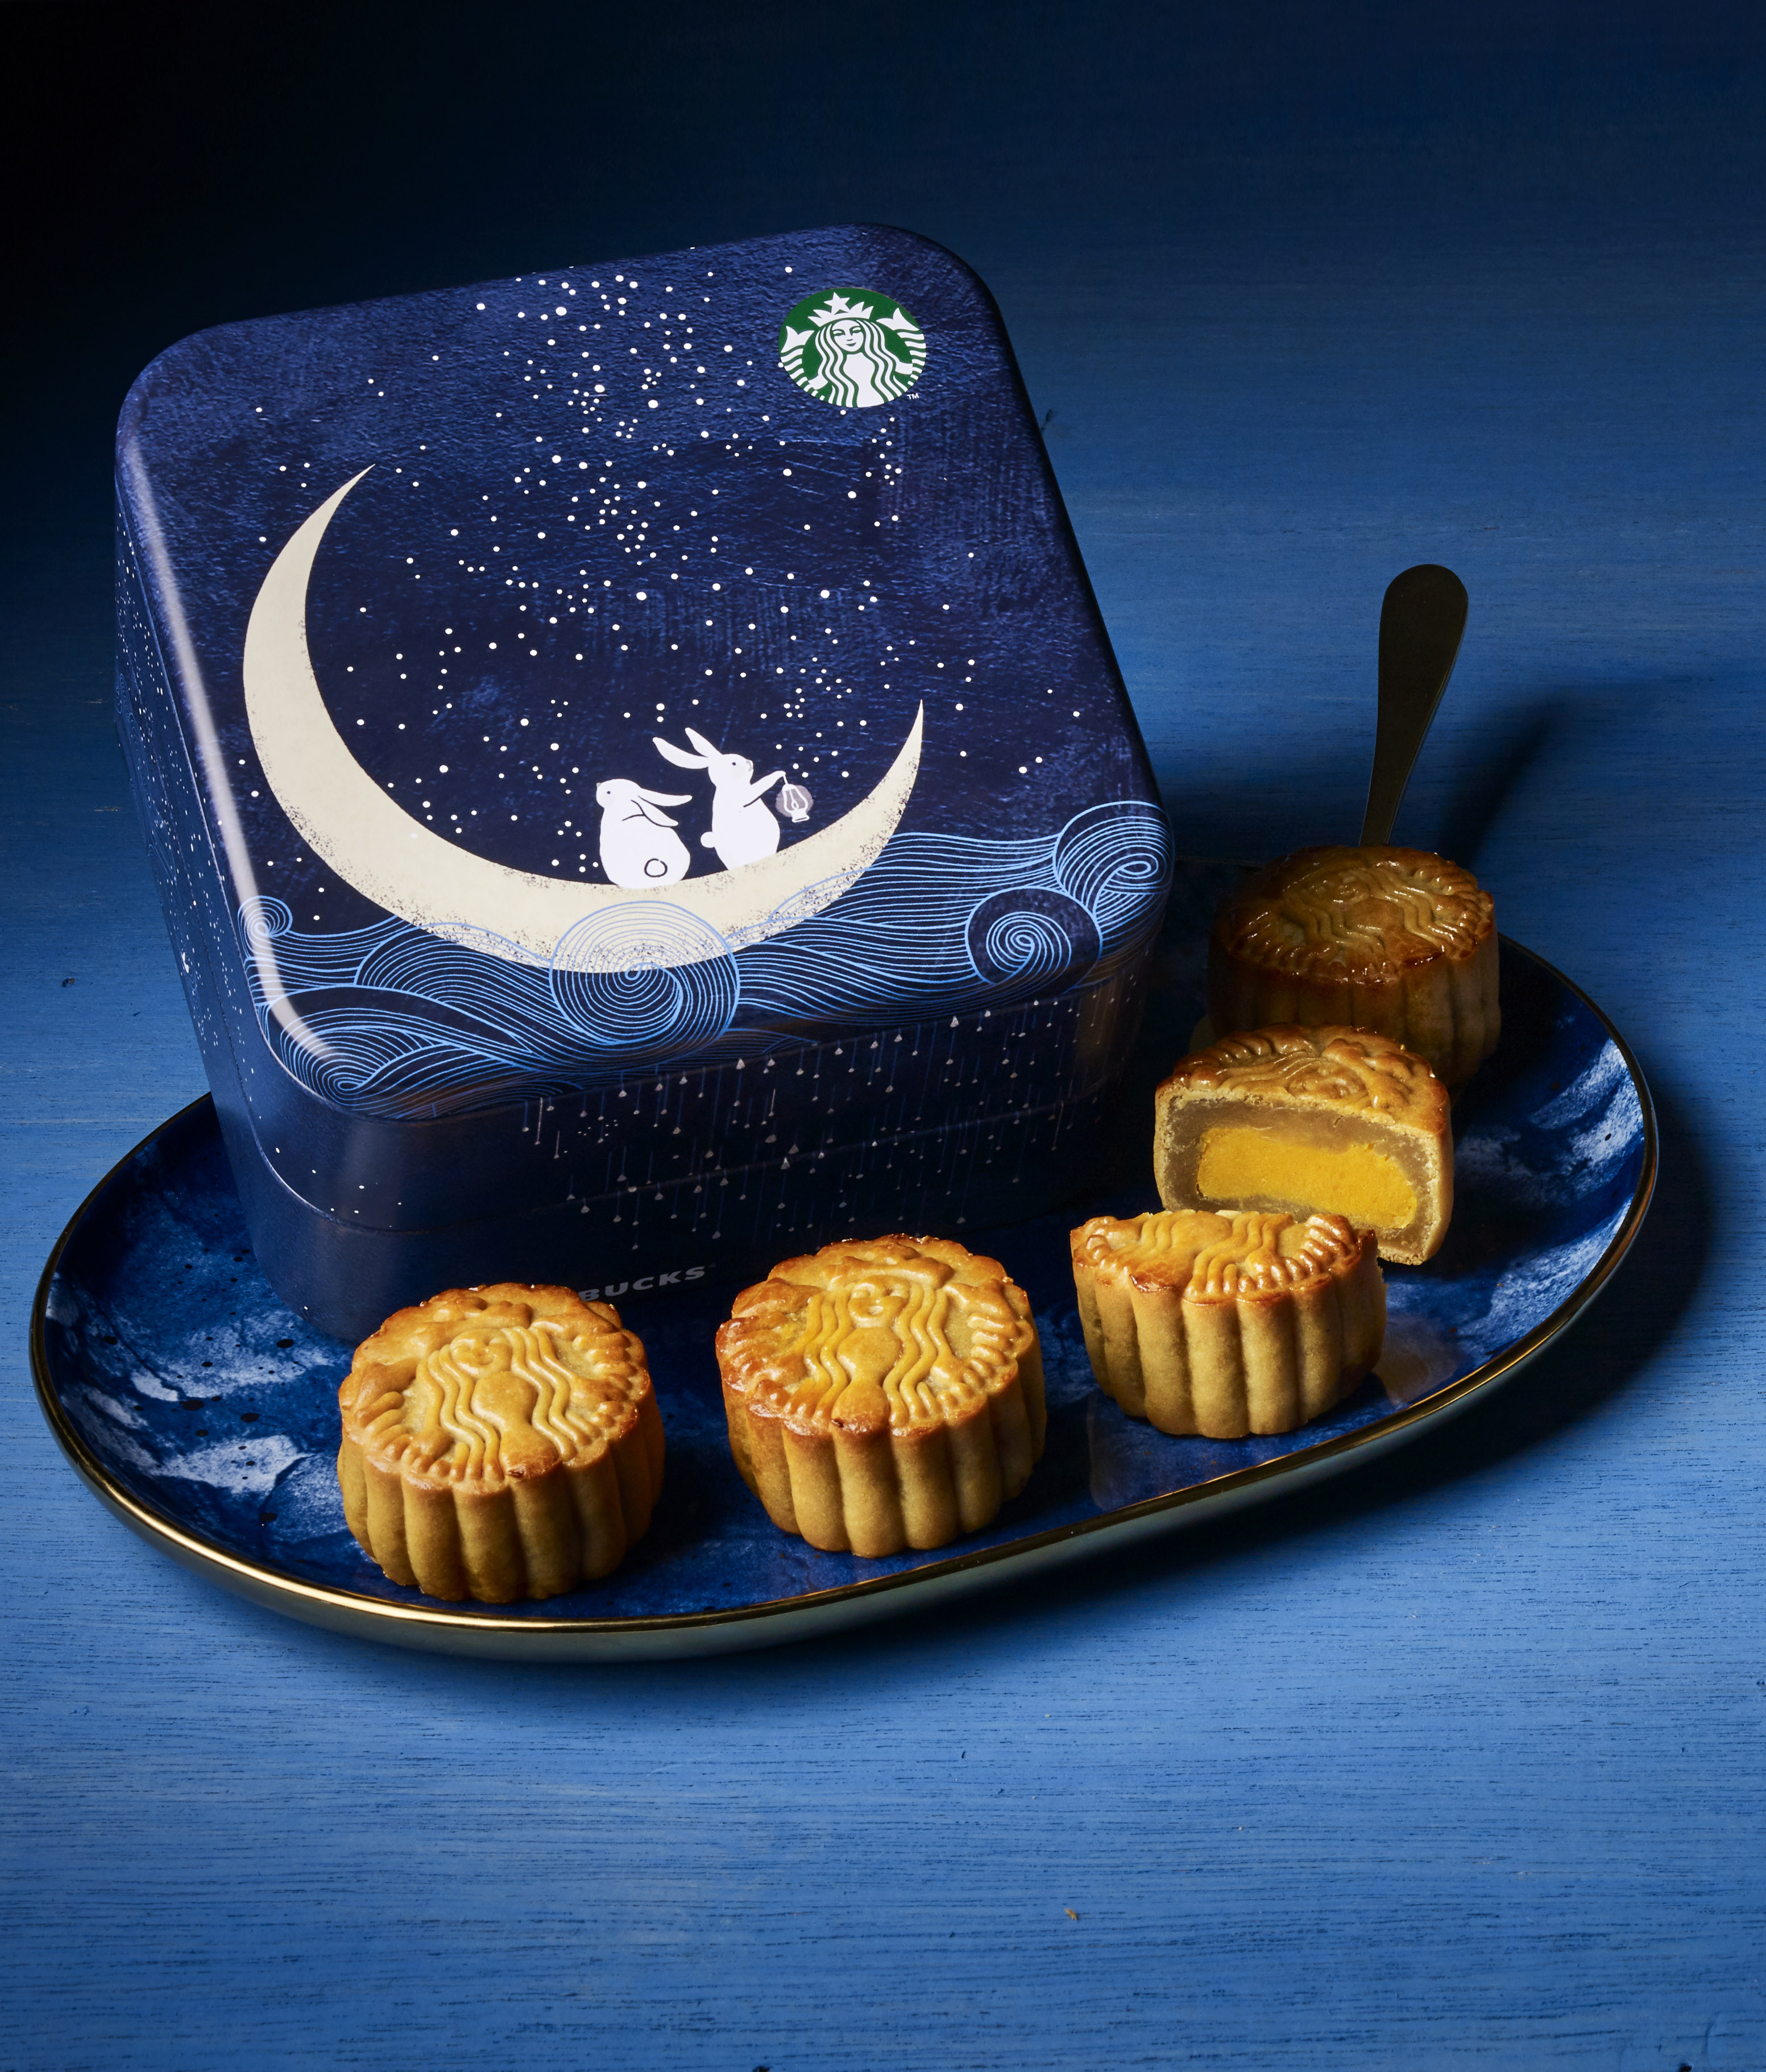 Starbucks welcomes Mid-Autumn Festival with new mooncakes, merchandise, and a 15% discount - Alvinology